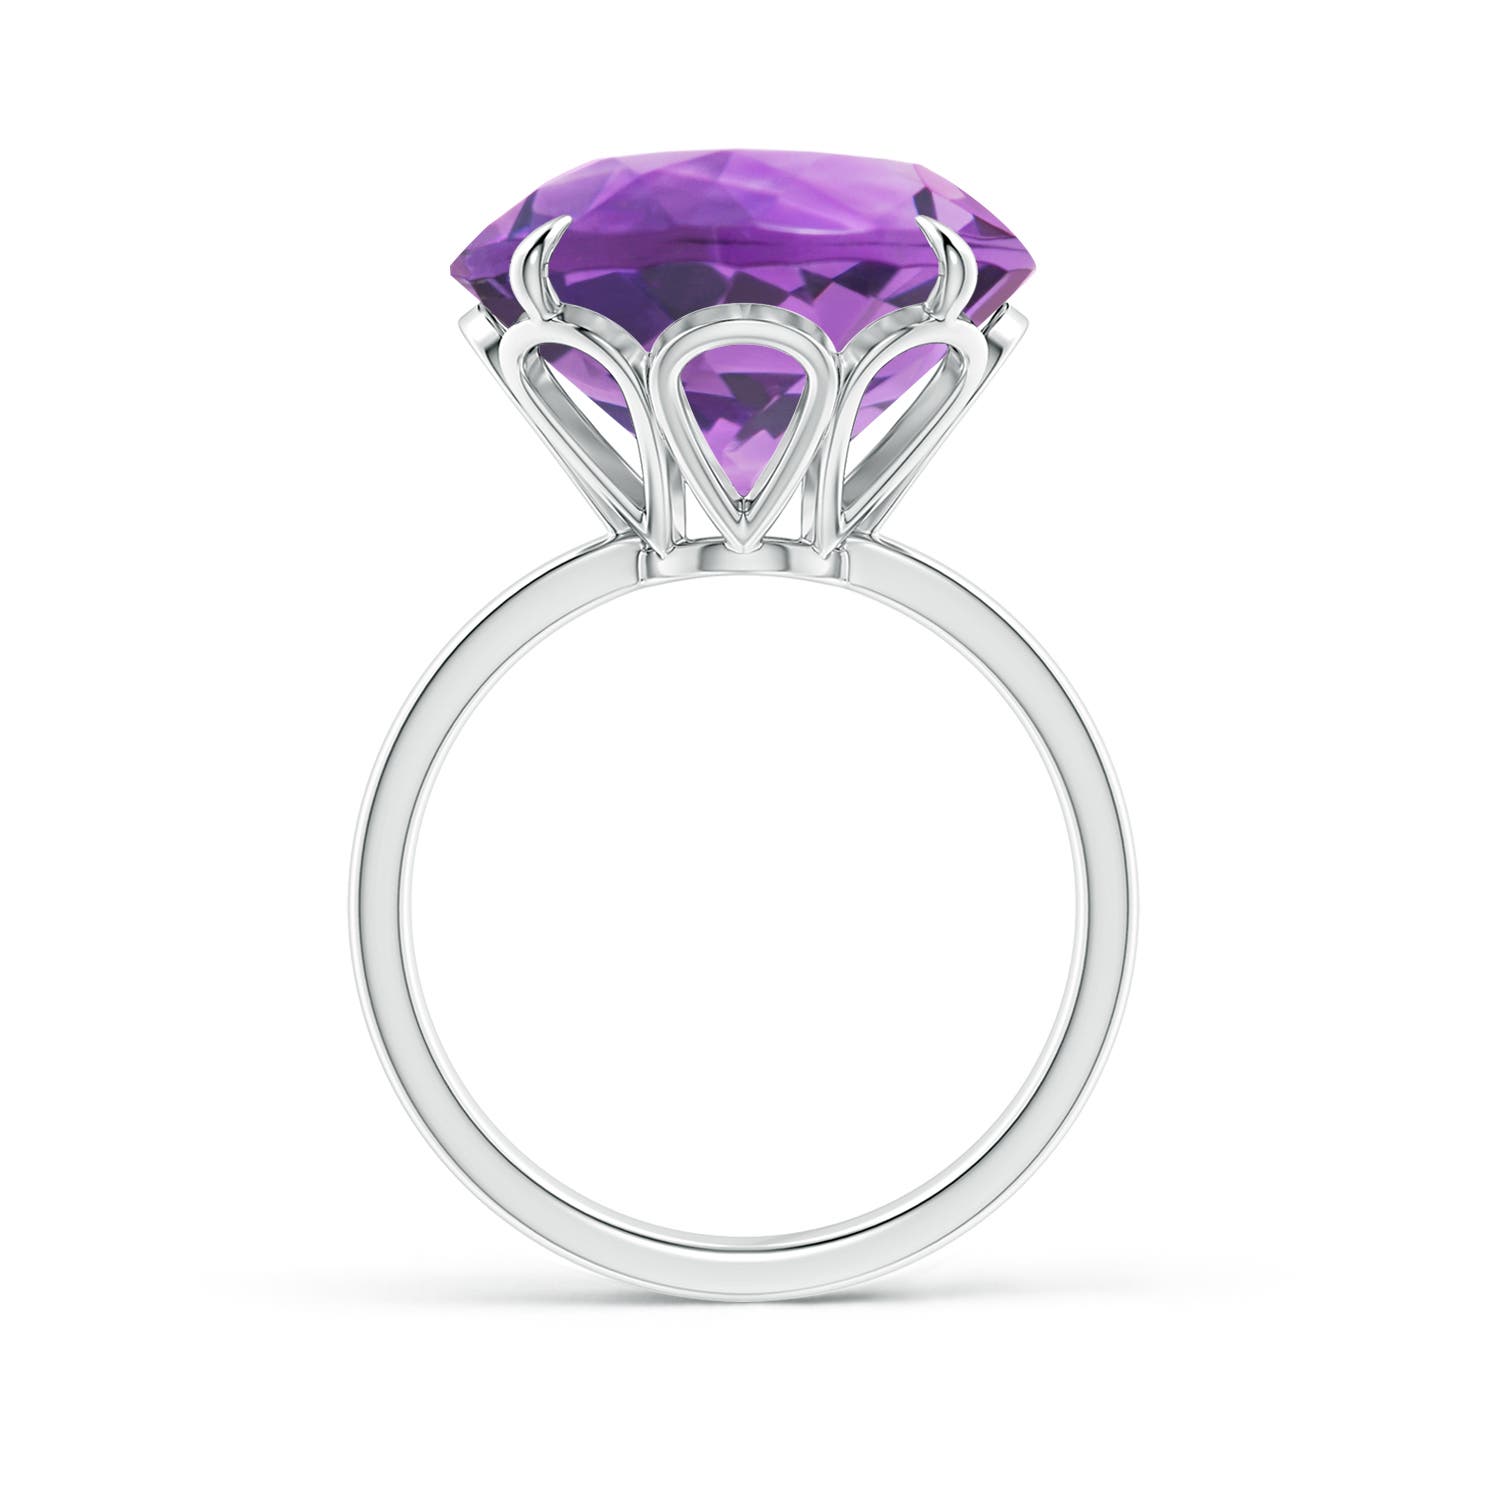 AA- Amethyst / 11 CT / 14 KT White Gold